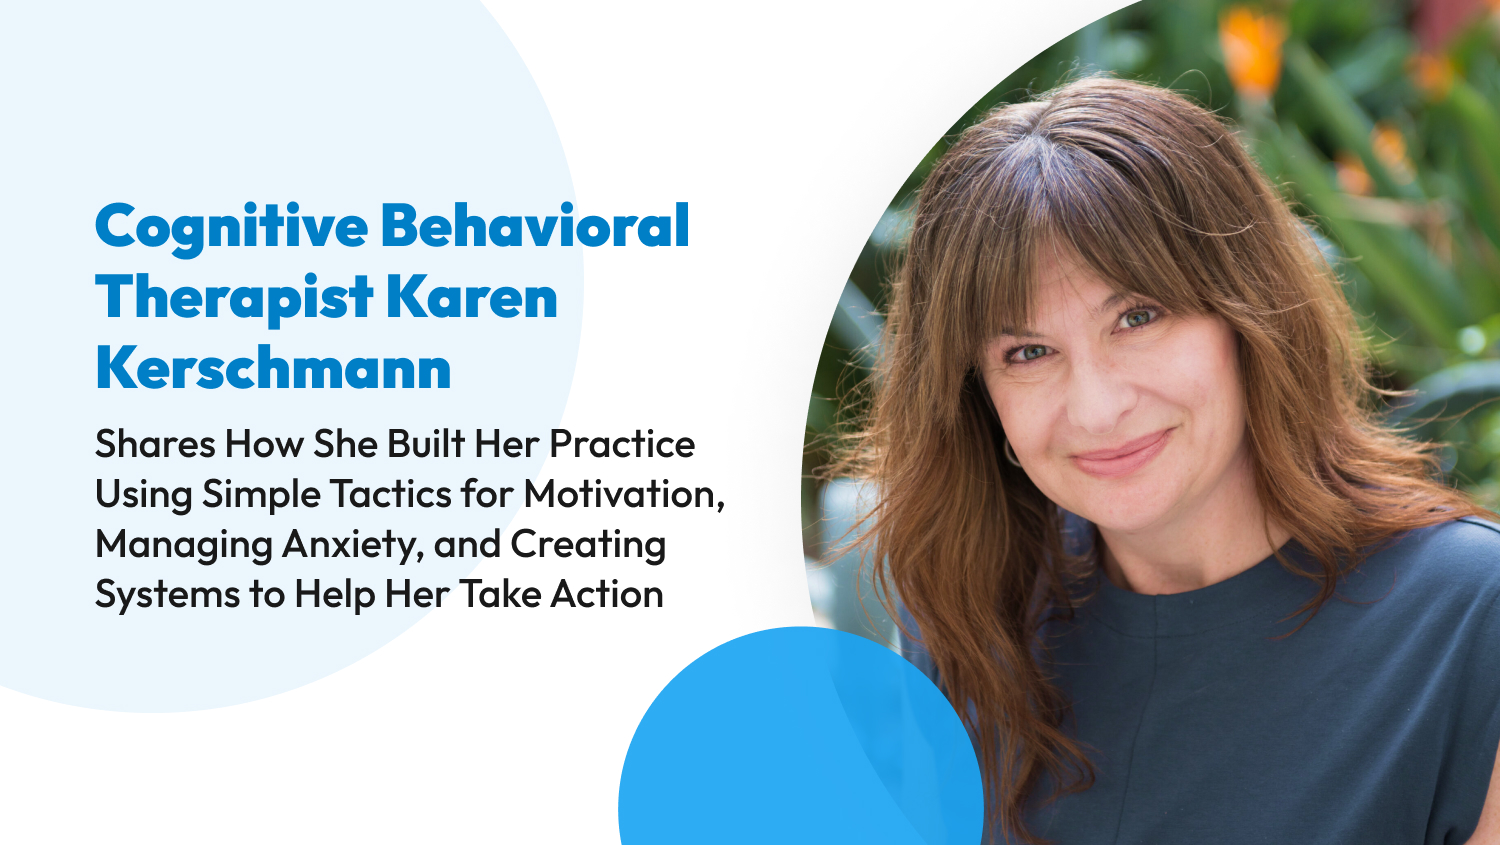 Cognitive Behavioral Therapist Karen Kerschmann Shares How She Built Her Practice Using Simple Tactics for Motivation, Managing Anxiety, and Creating Systems to Help Her Take Action